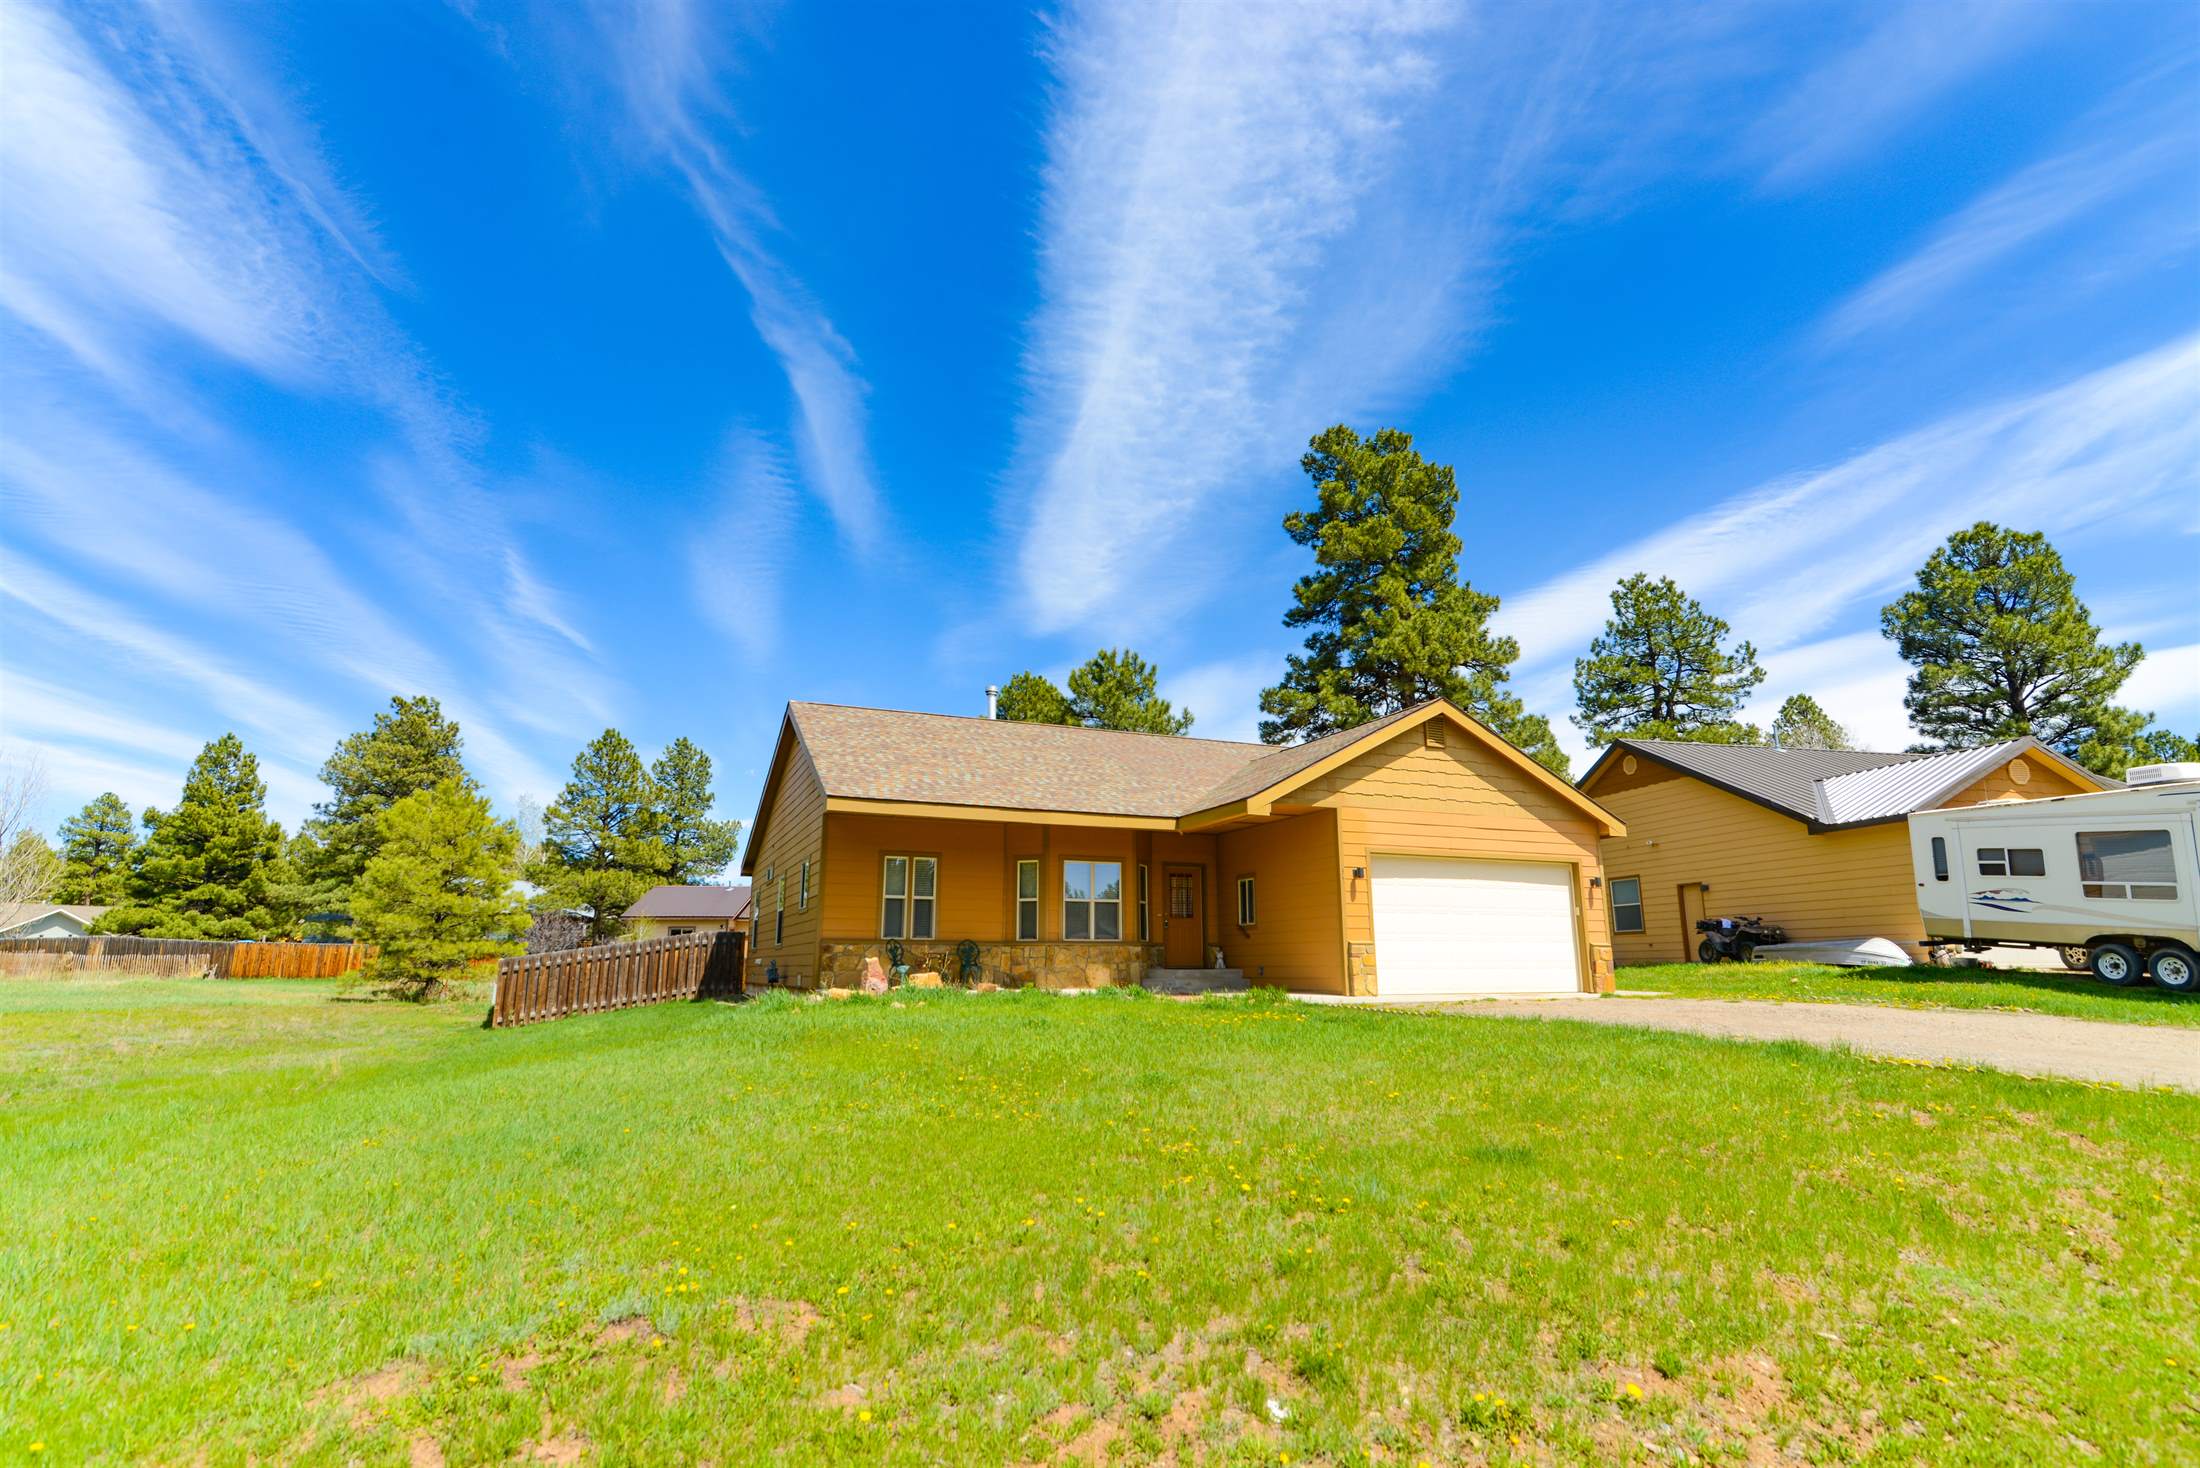 Chipper's Abode, #35 Chipper Ct - ST, Pagosa Springs, CO 81147